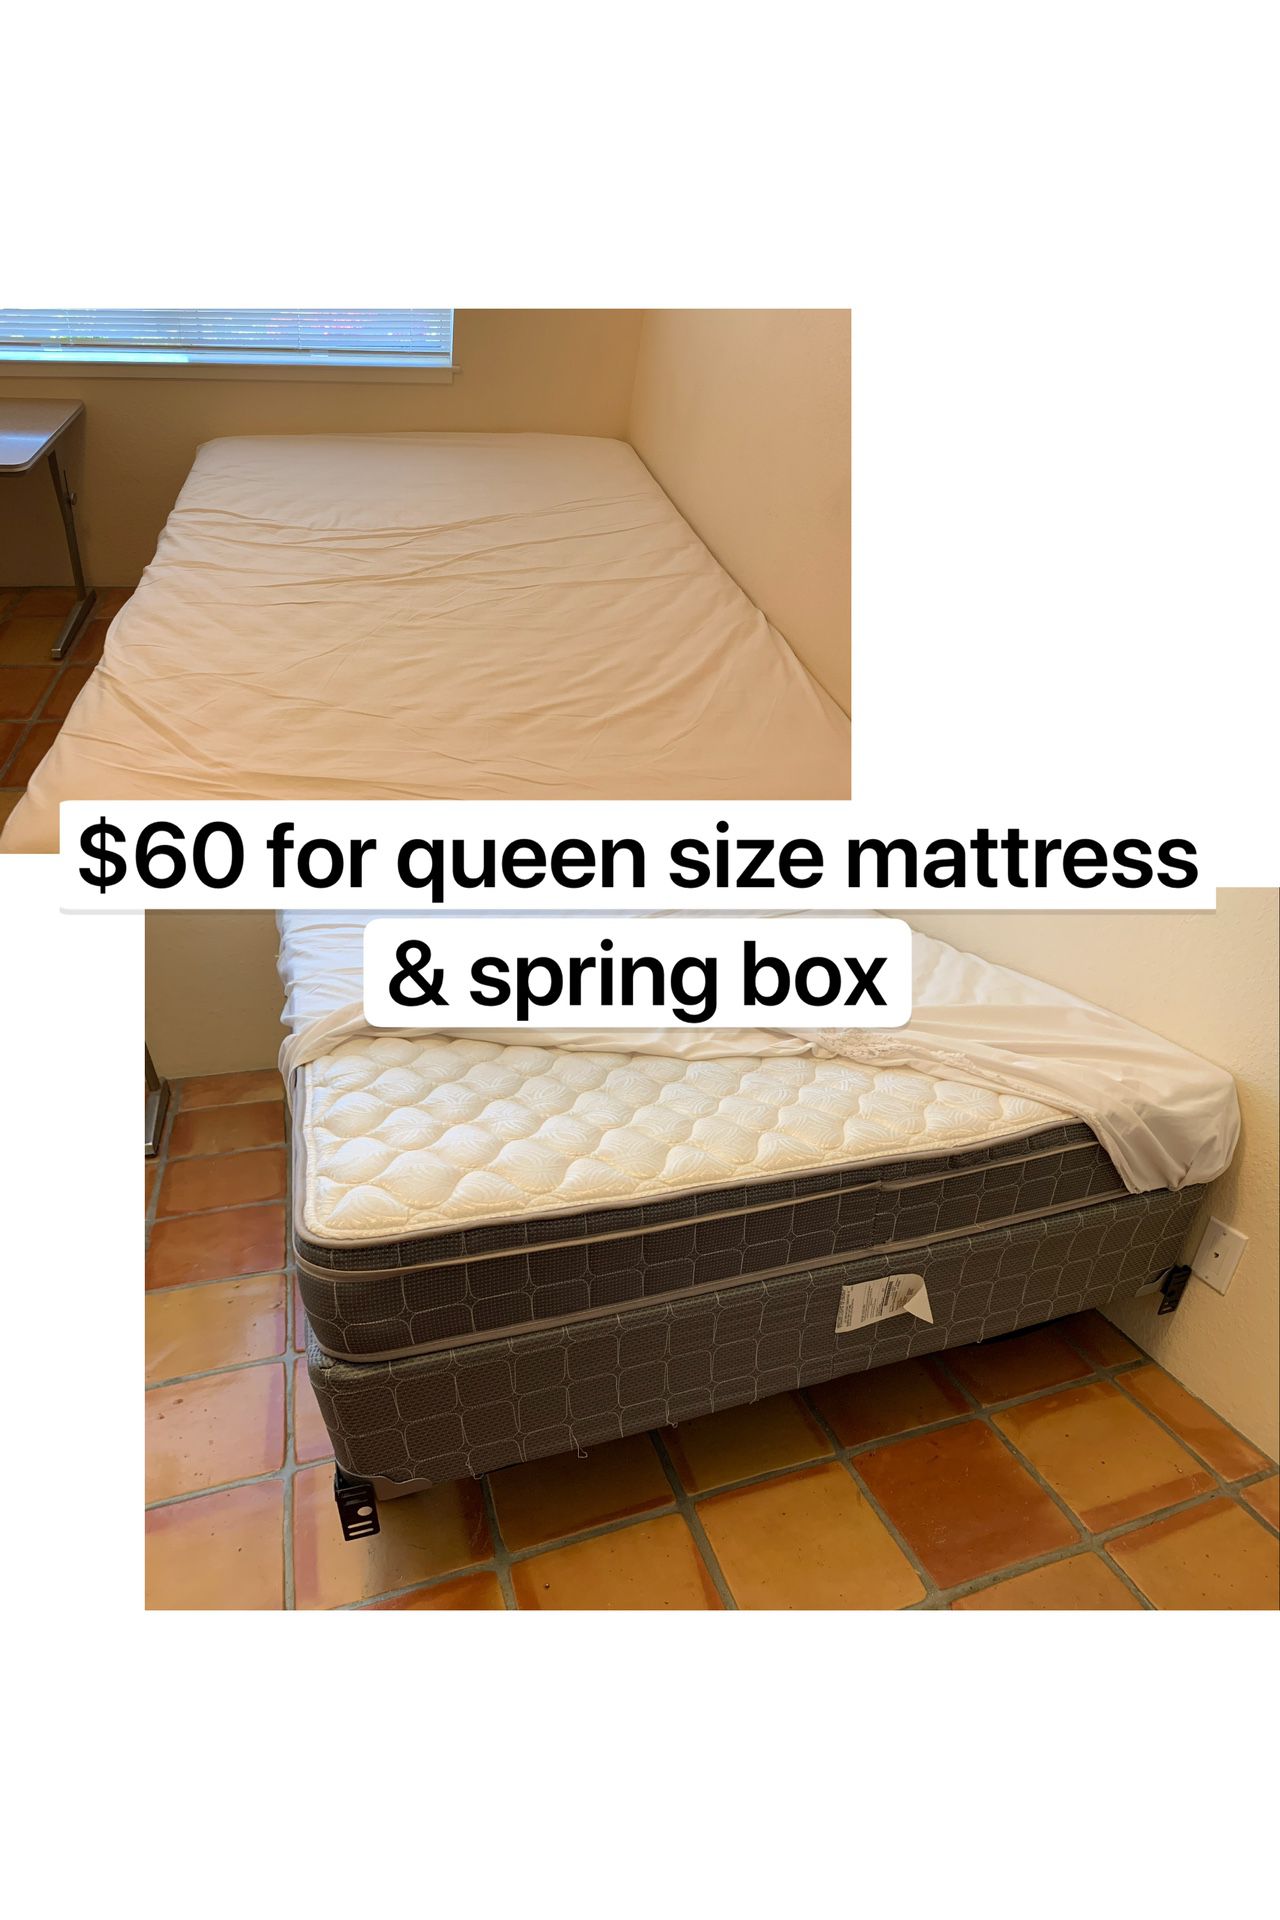 Queen size mattress and spring box